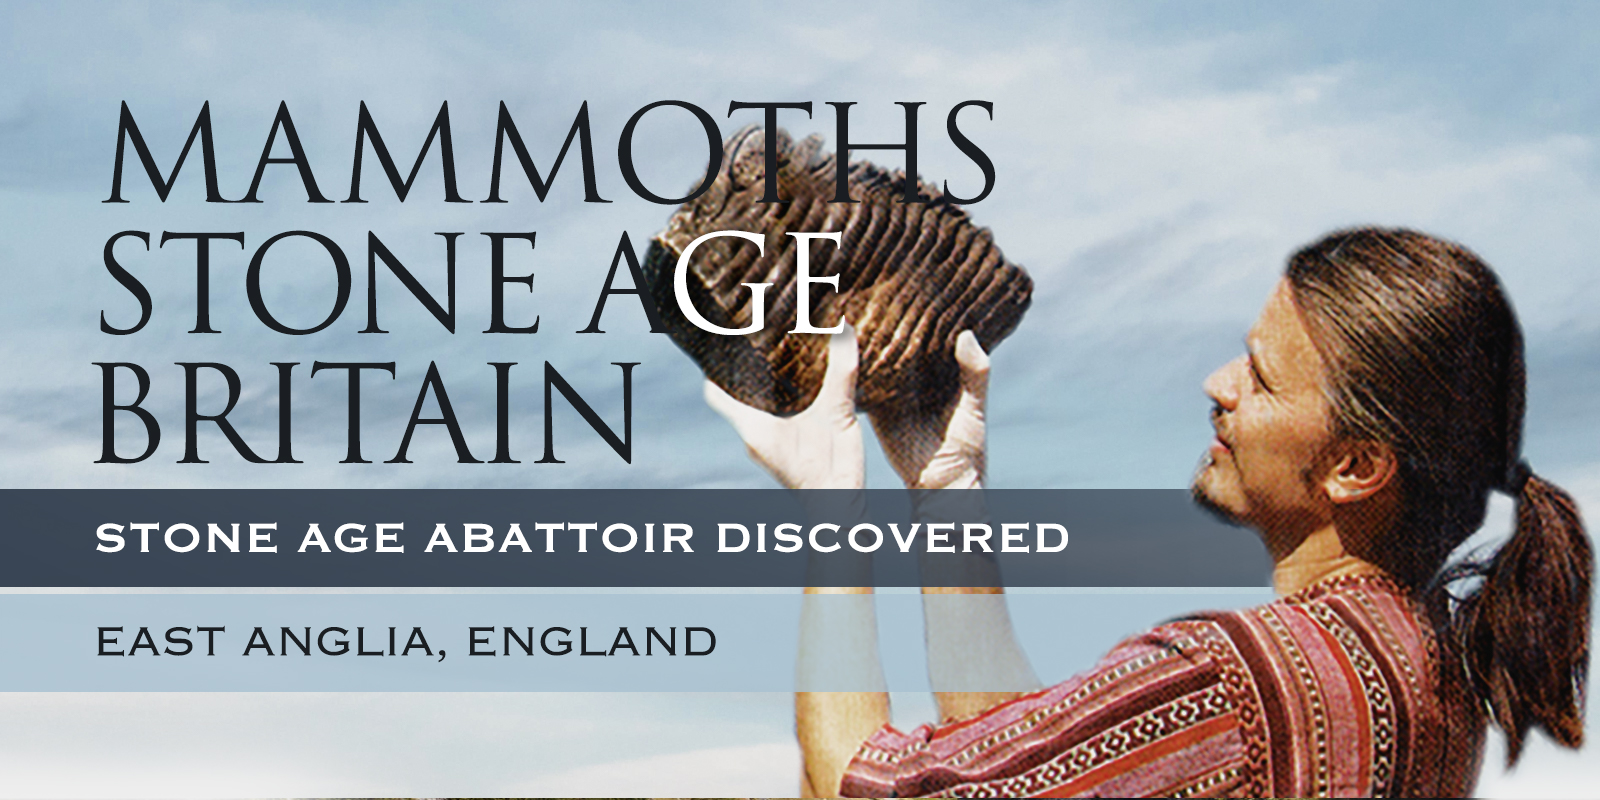 The Mammoths of Stone Age Britain - Neanderthal Hunting Tools